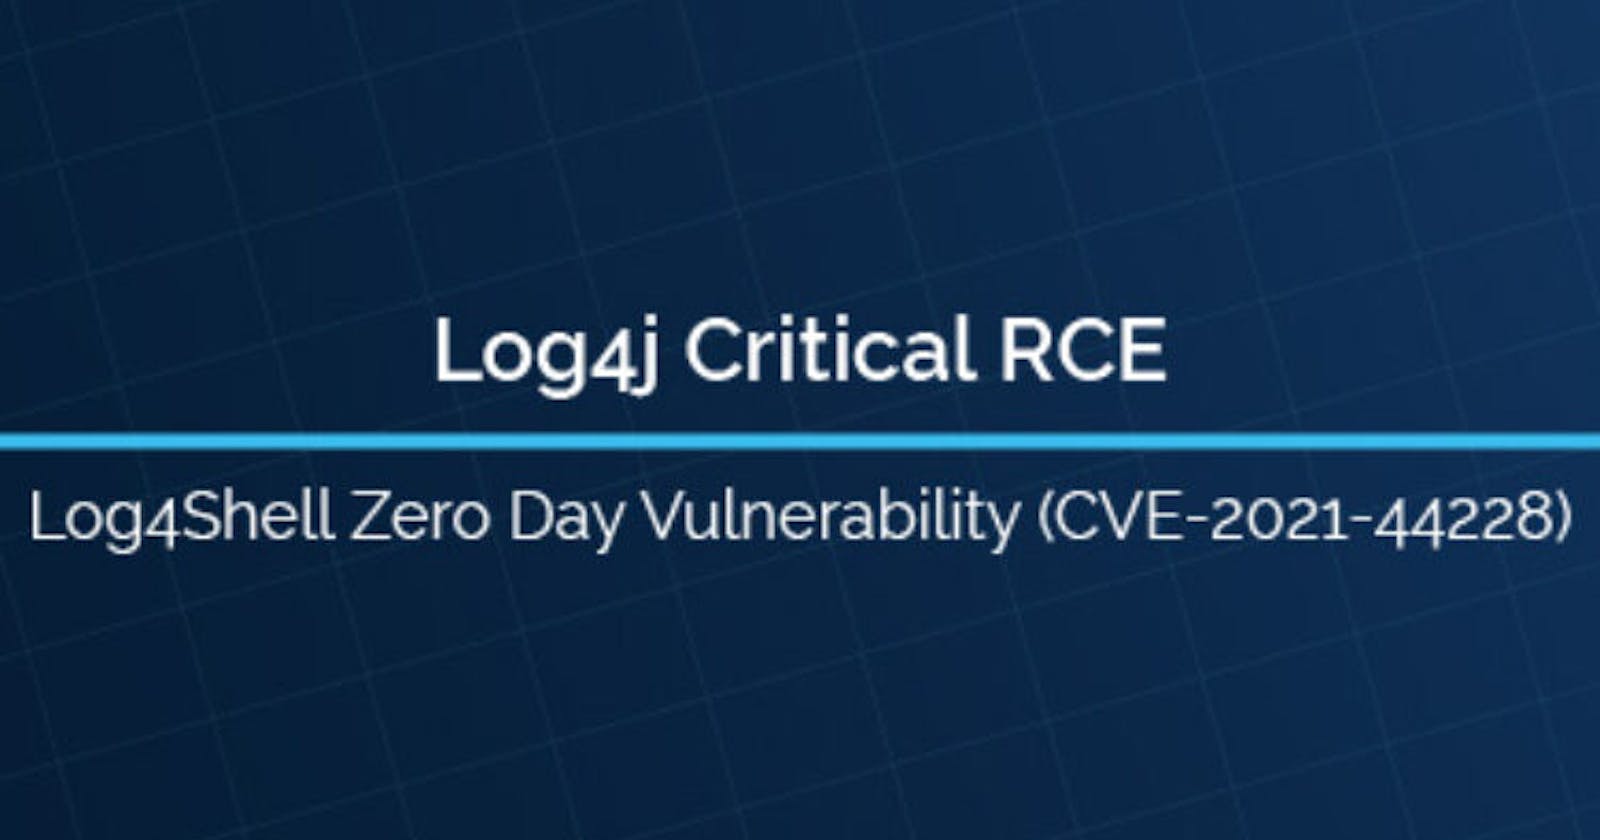 Remote Code Execution (RCE) Vulnerability in Log4j